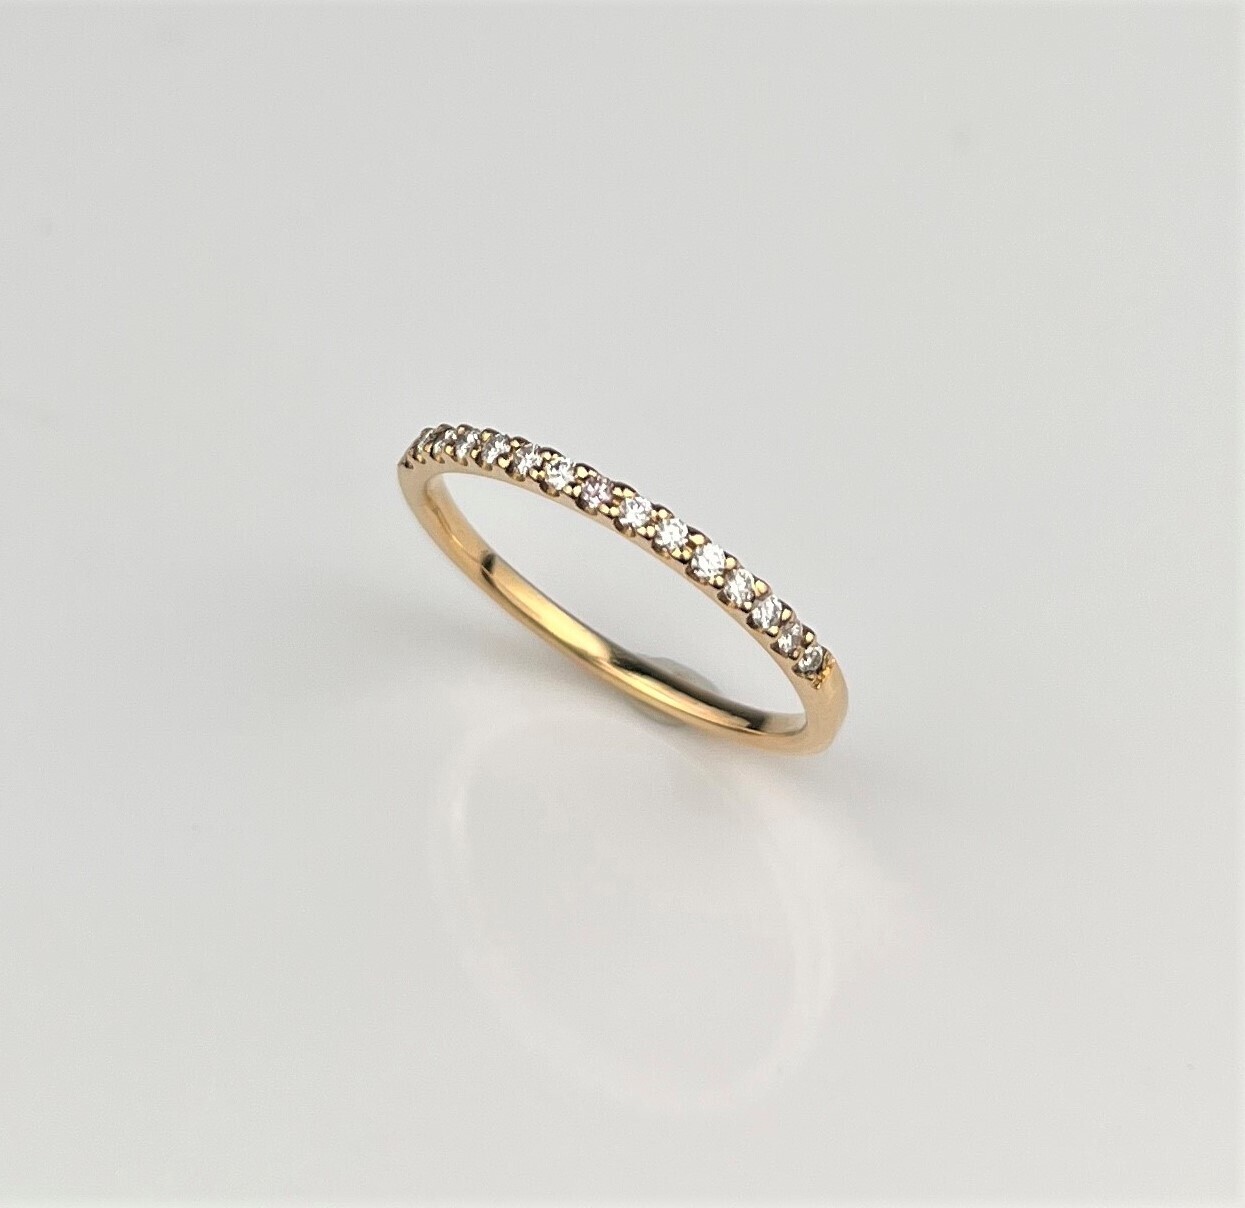 14K Yellow Gold Ring with 14 White and 1 Pink Diamonds Size 6